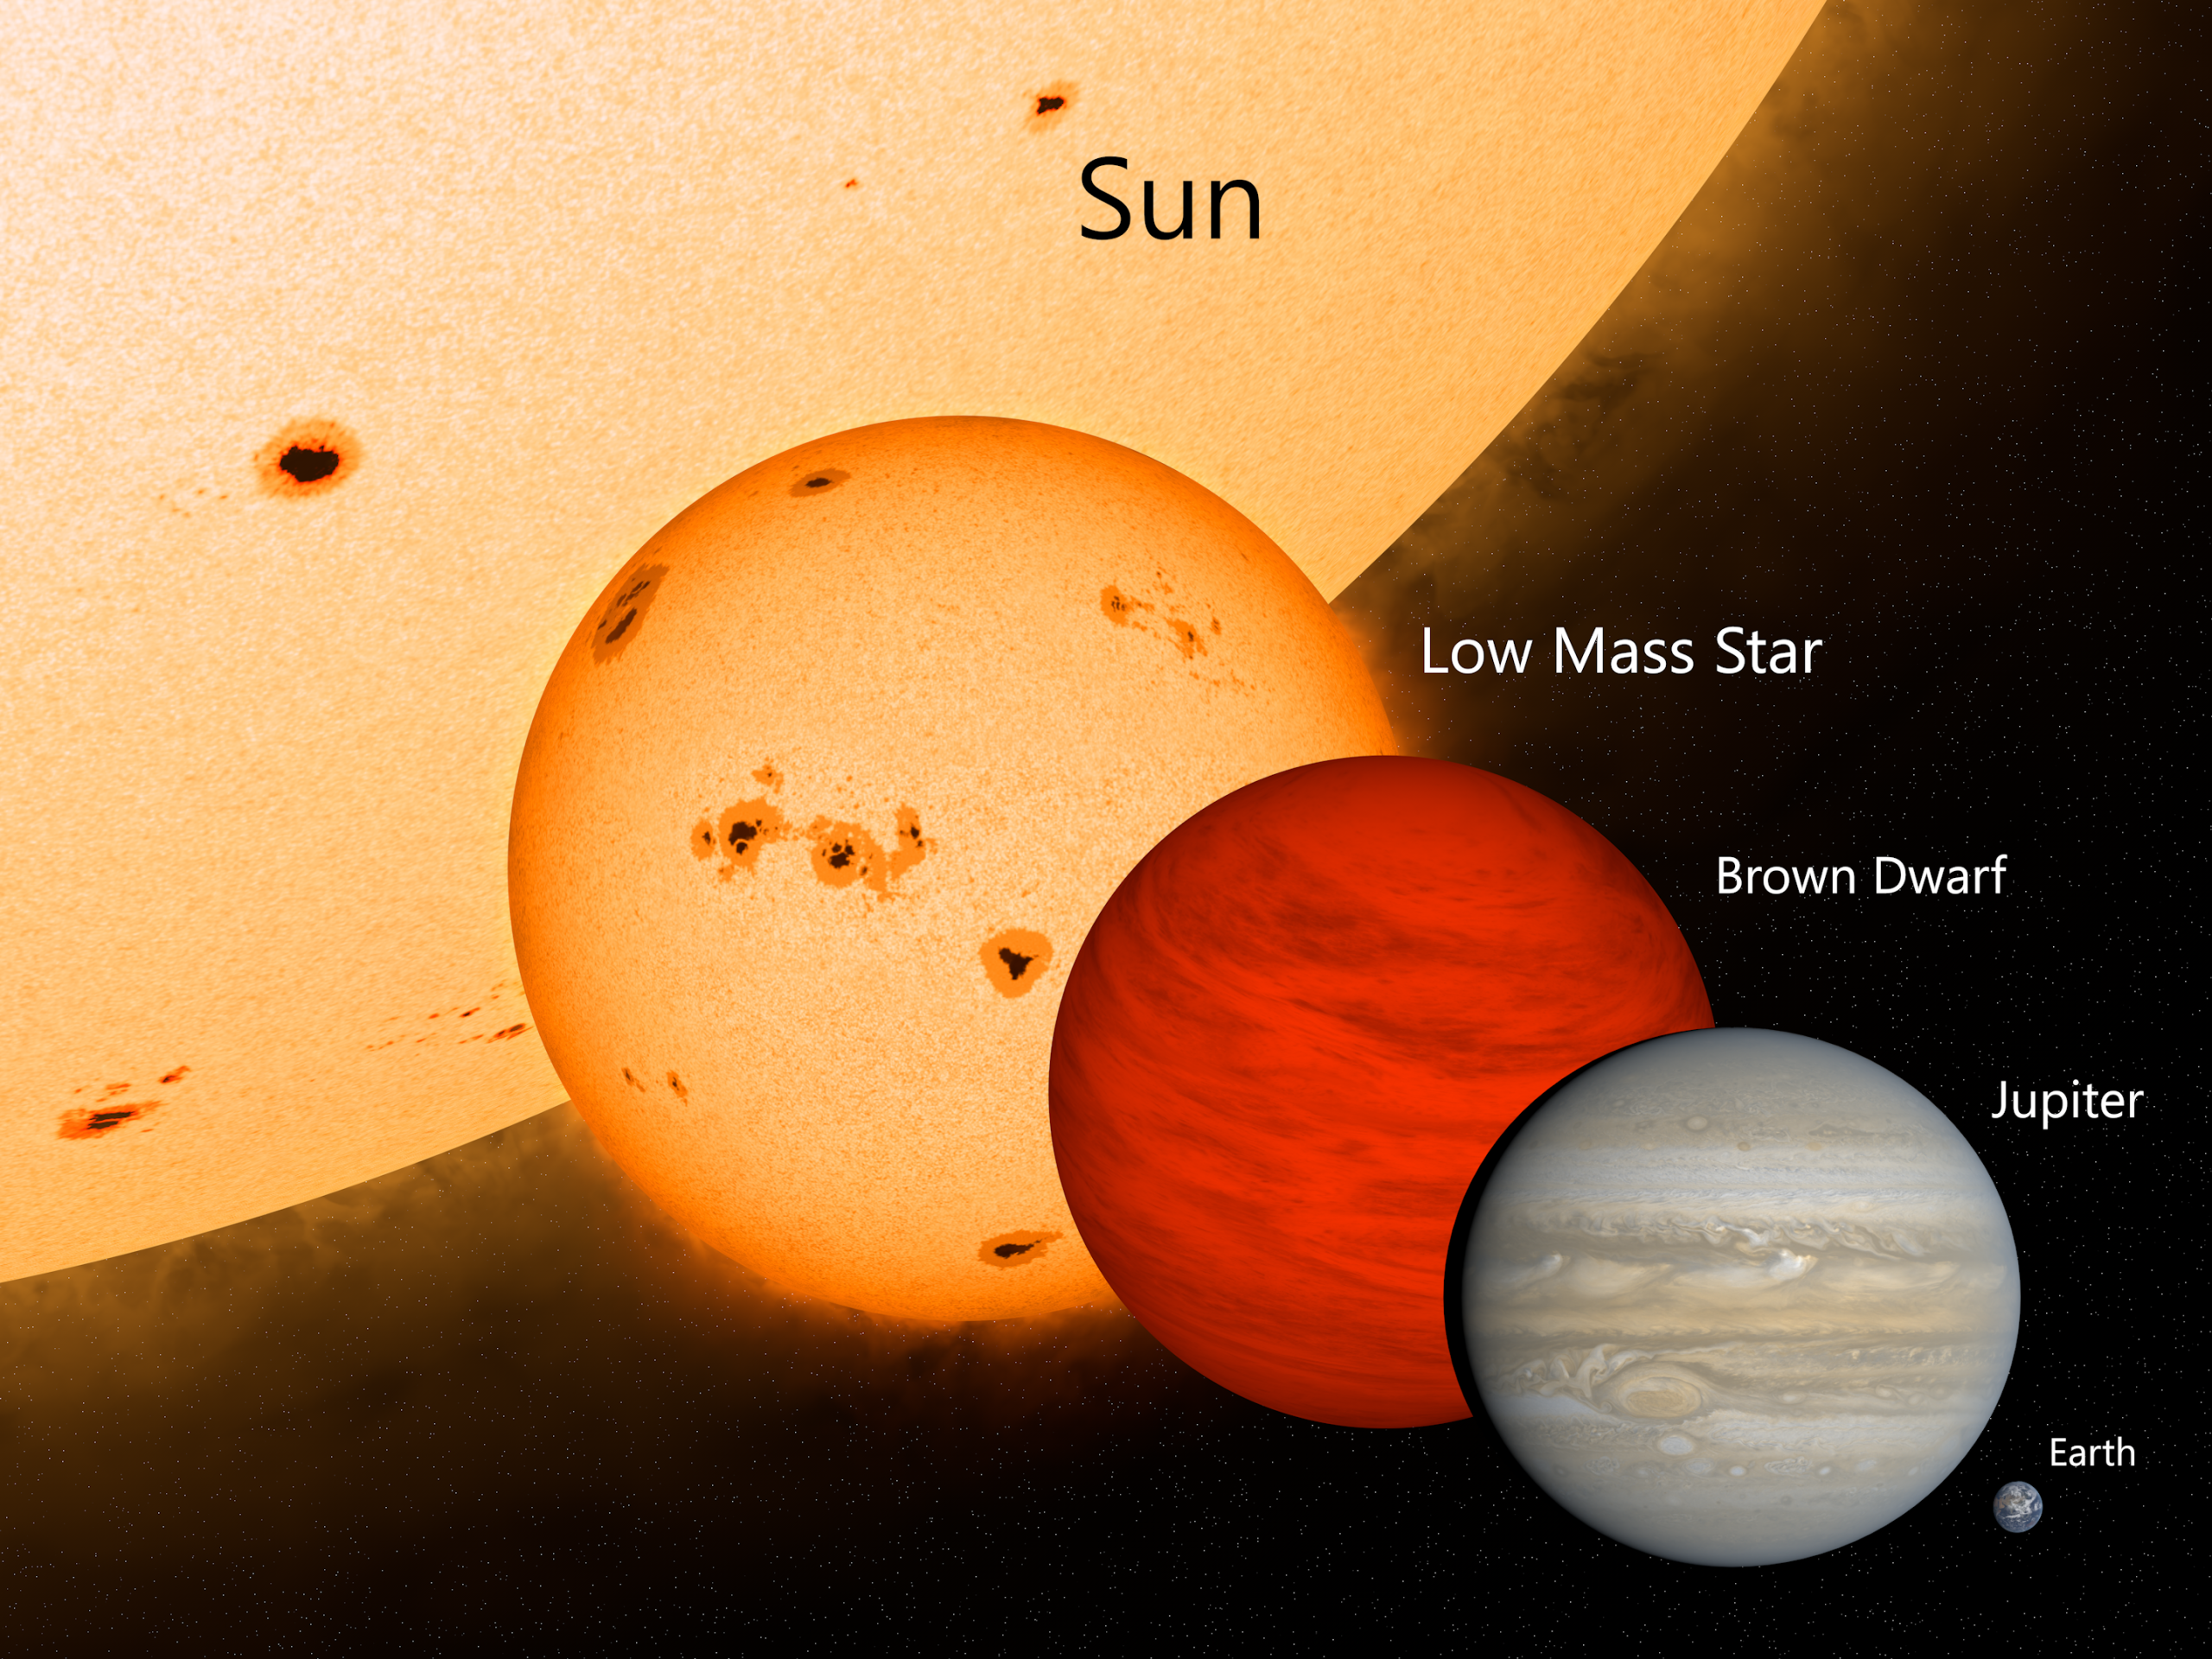 Although brown dwarfs tend to be slightly larger (15–20%) than Jupiter, they are still up to 80 times more massive due to their higher density. The shows a comparison between the Sun, a low mass star, a Brown Dwarf, Jupiter, and our planet. Image Credit" Wikimedia Commons - Planetkid32.